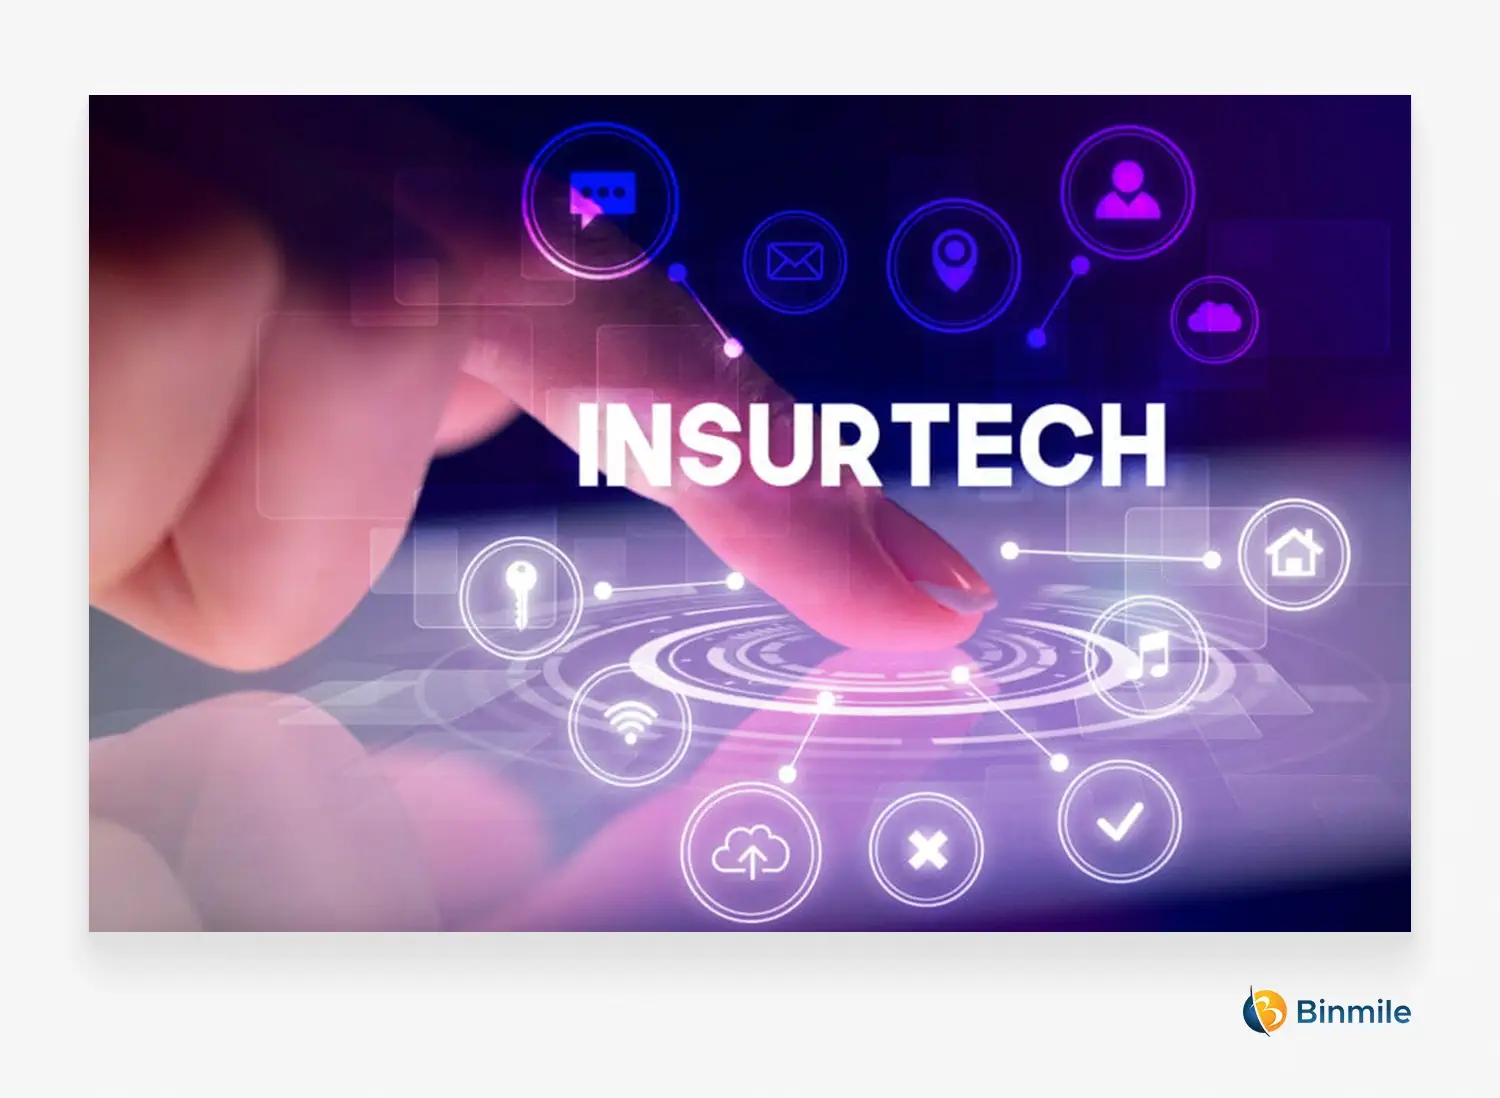 Benefits of right investment in insurtech